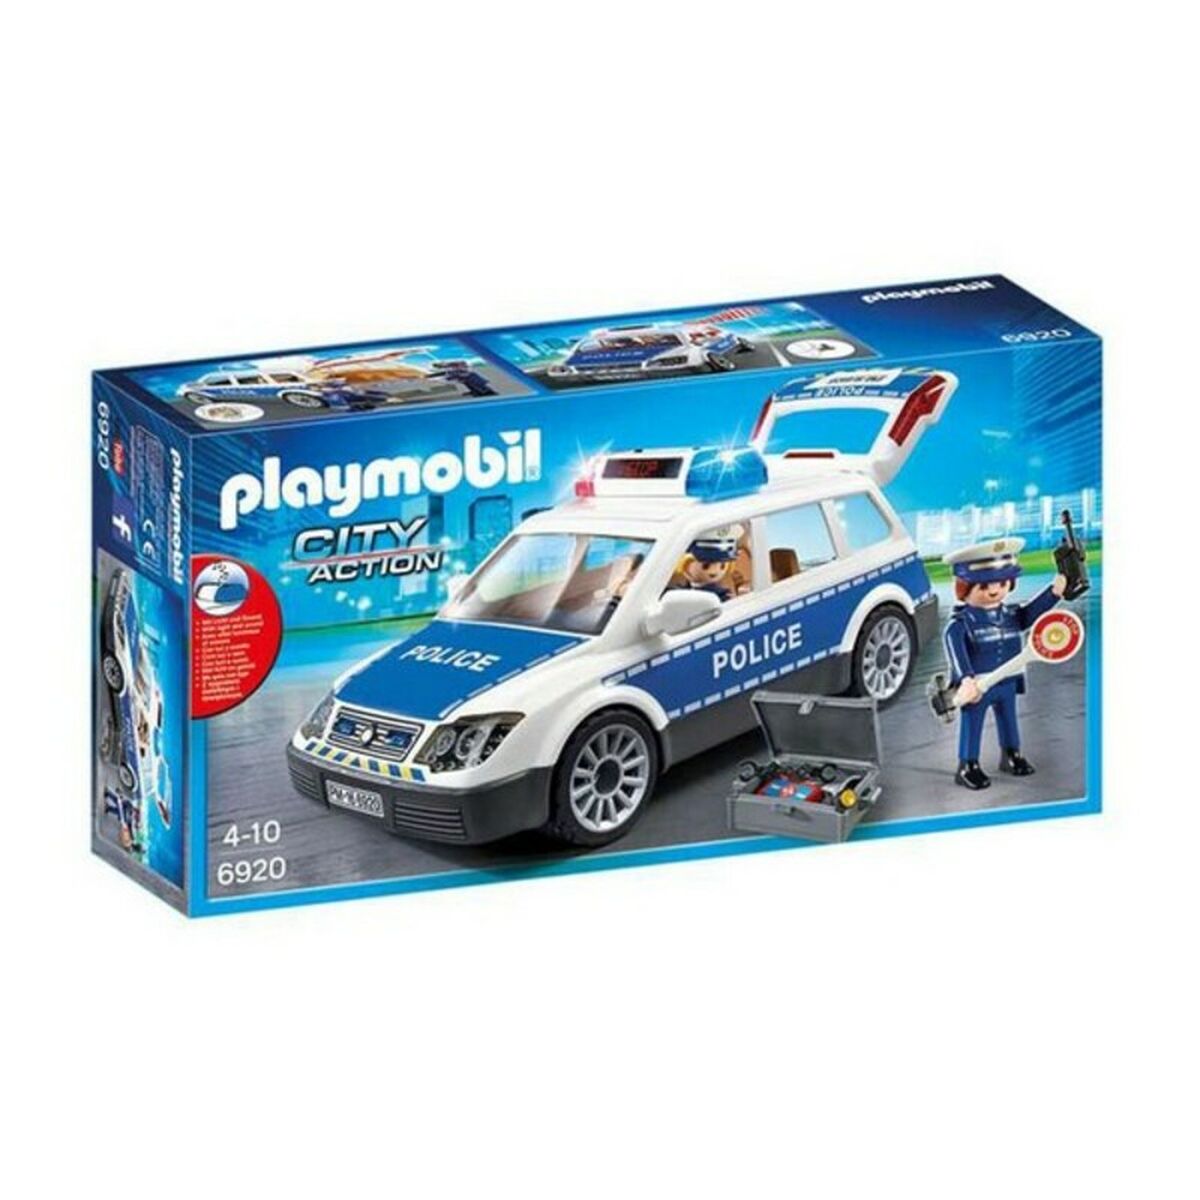 City Action Police Playmobil Squad Car with Lights and Sound